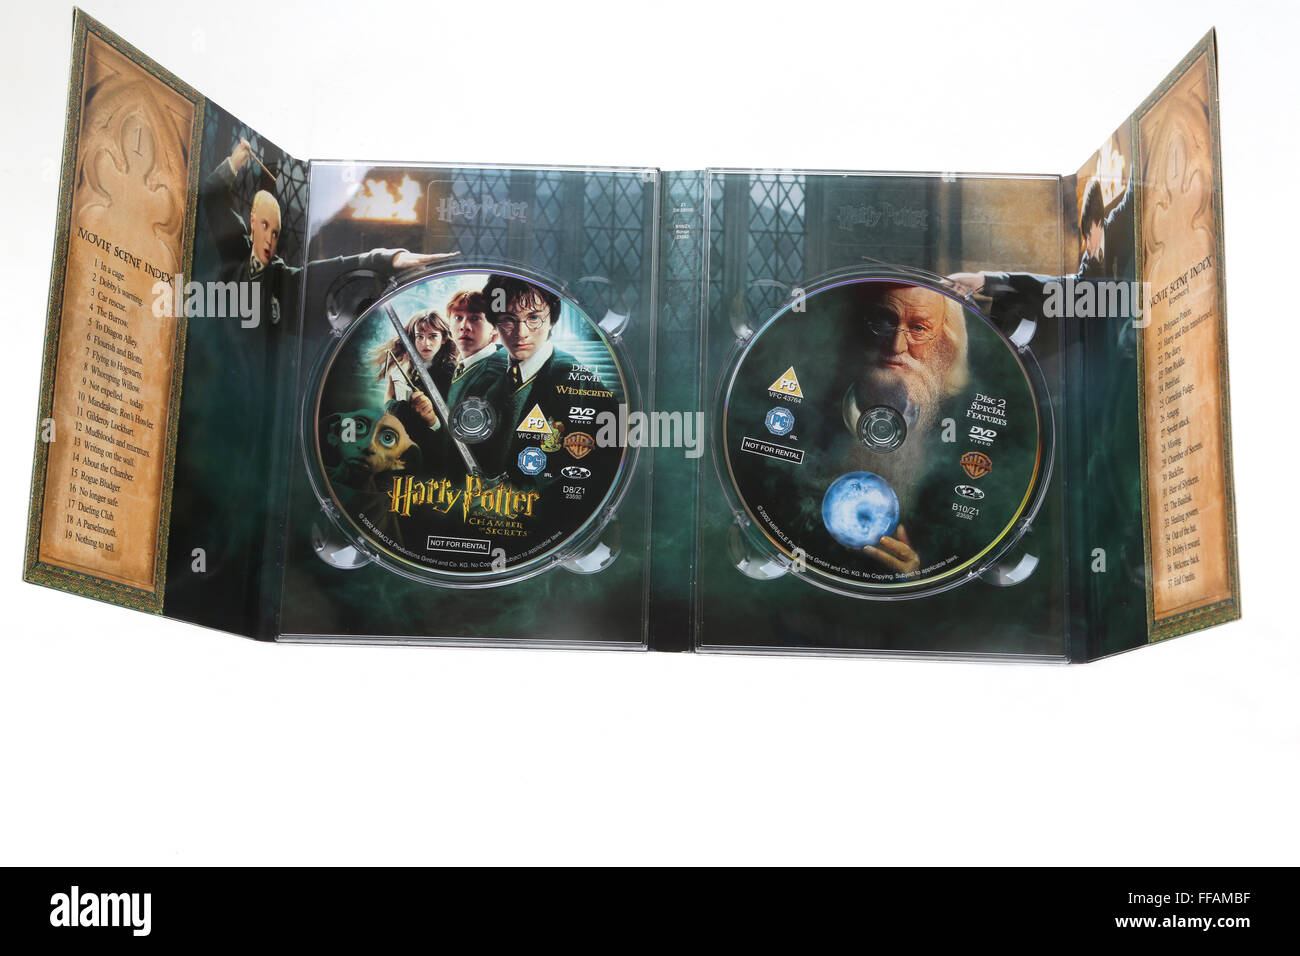  Harry Potter and the Chamber of Secrets (Single-Disc